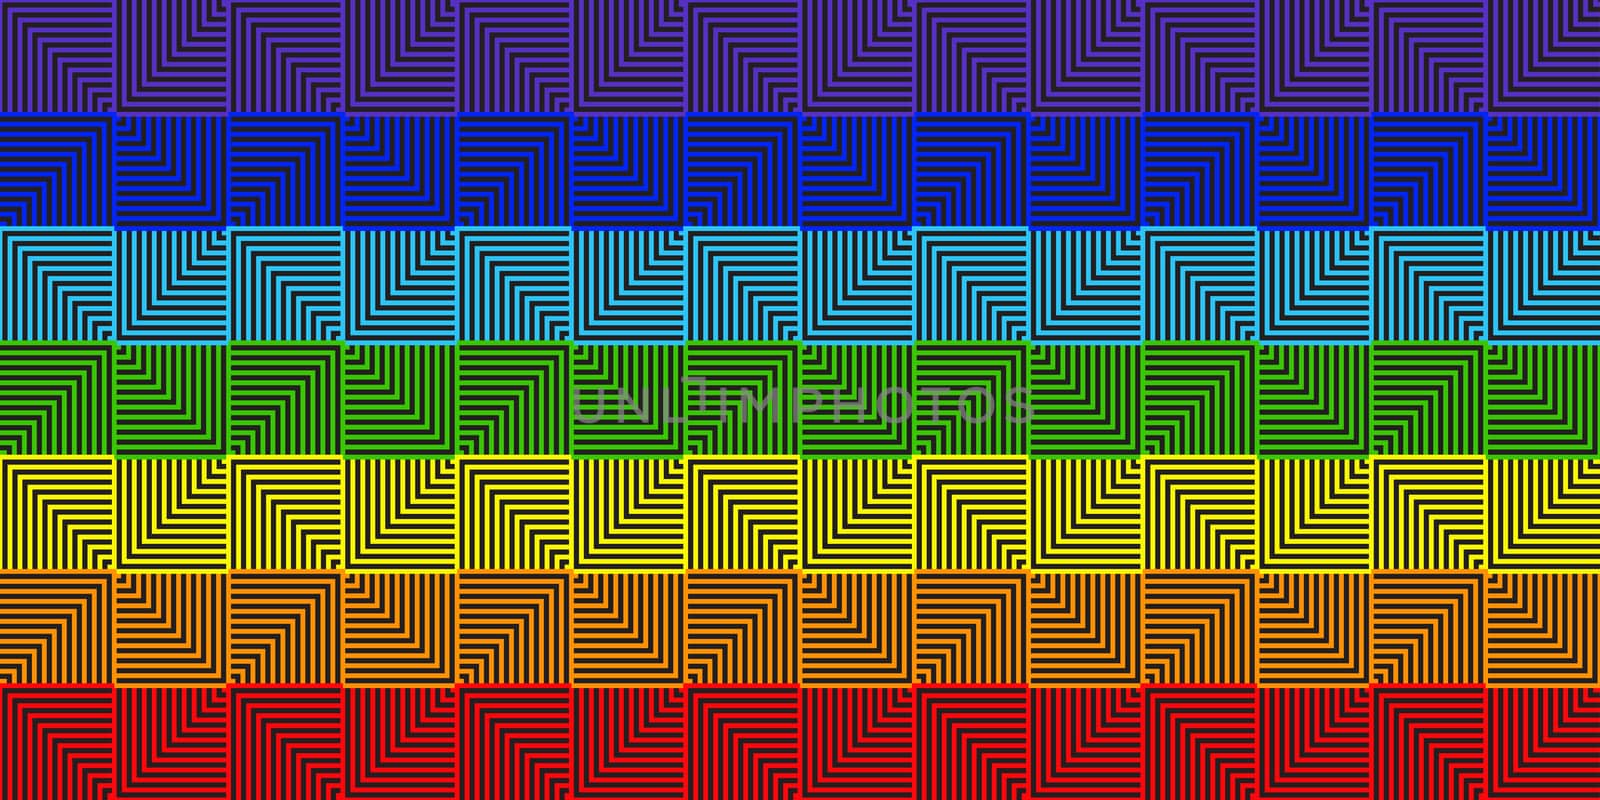 Abstract line square rainbow geometric background - Vector illustration by Angyee